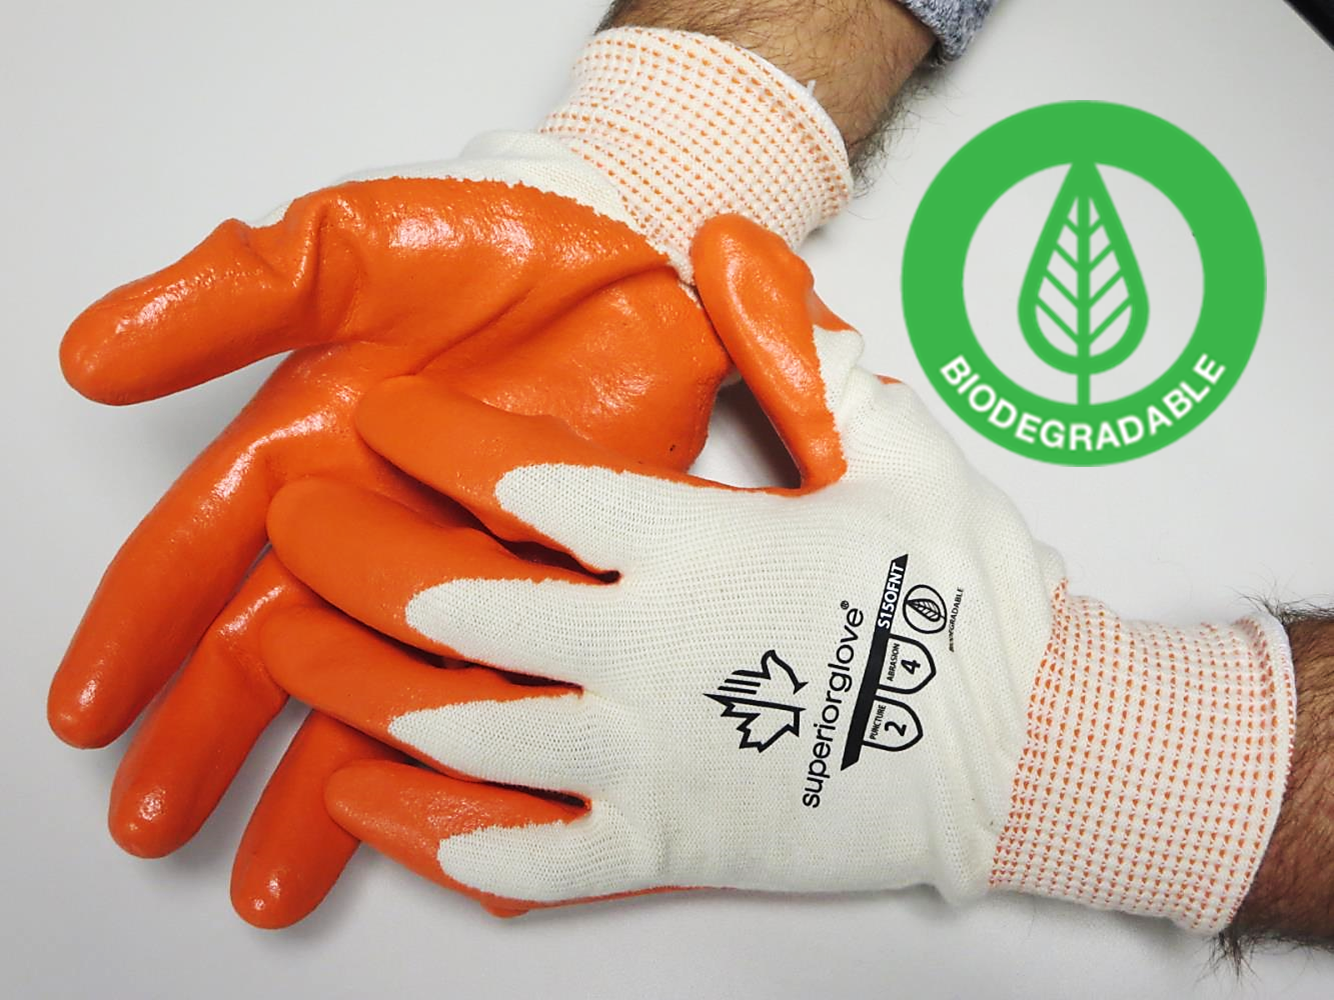 Superior Glove® biodegredable Dexterity® S15OFNT 15-gauge 100% virgin cotton seamless knit work gloves with hi-vis orange foam nitrile coating preserves the planet while providing ANSI rated abrasion and puncture protection.